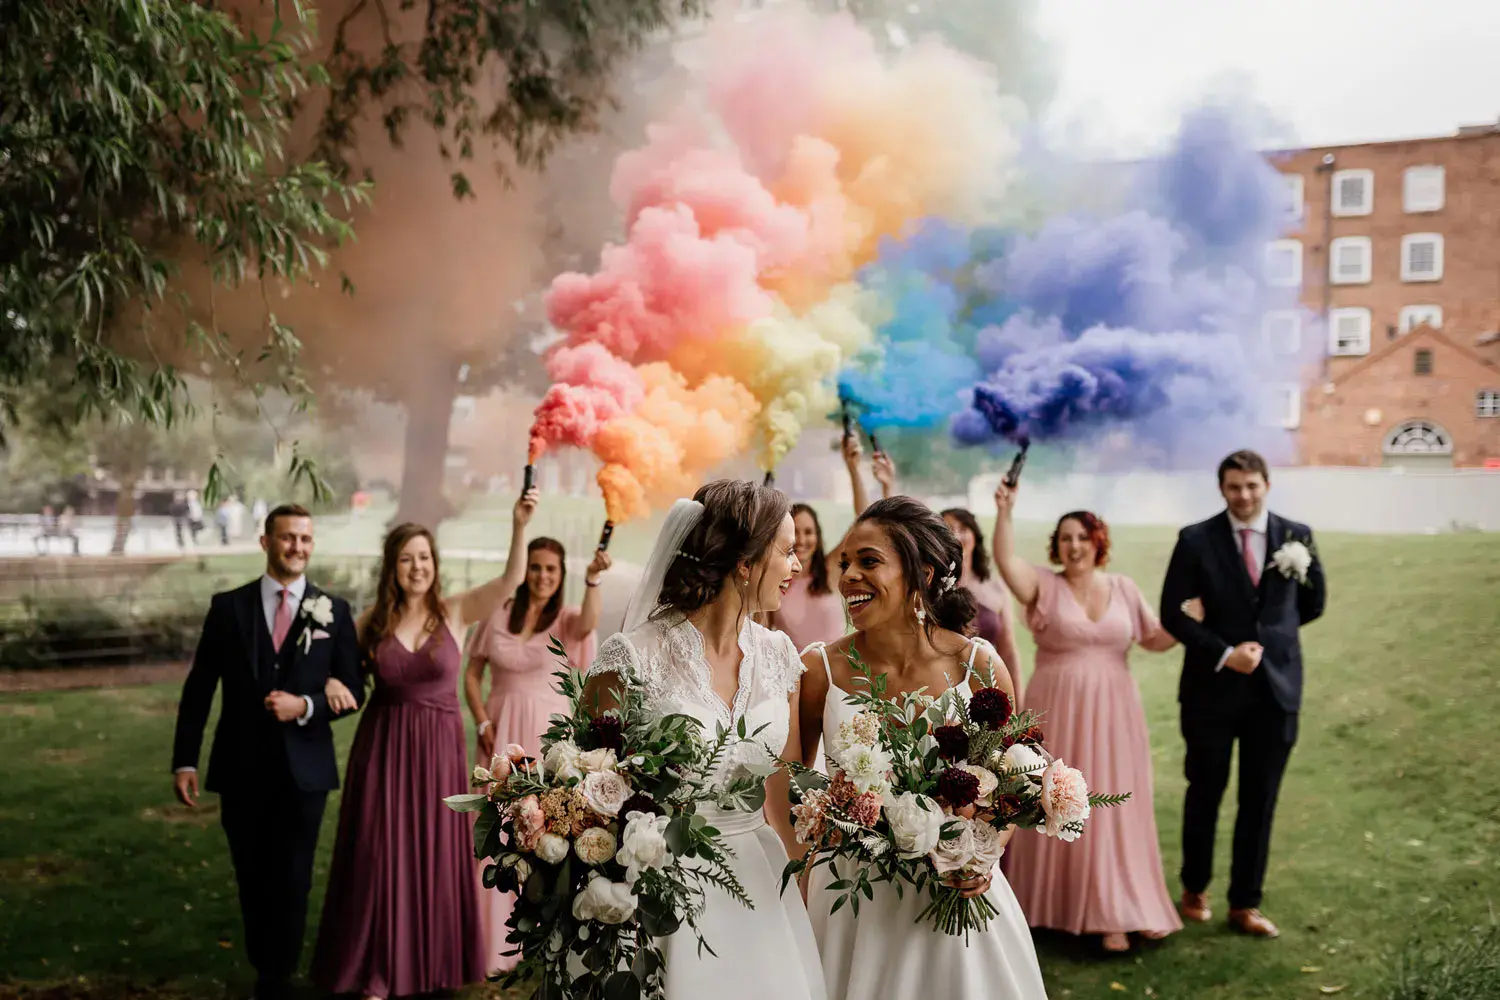 Smoke Bomb Wedding Photography: What You Need to Know.